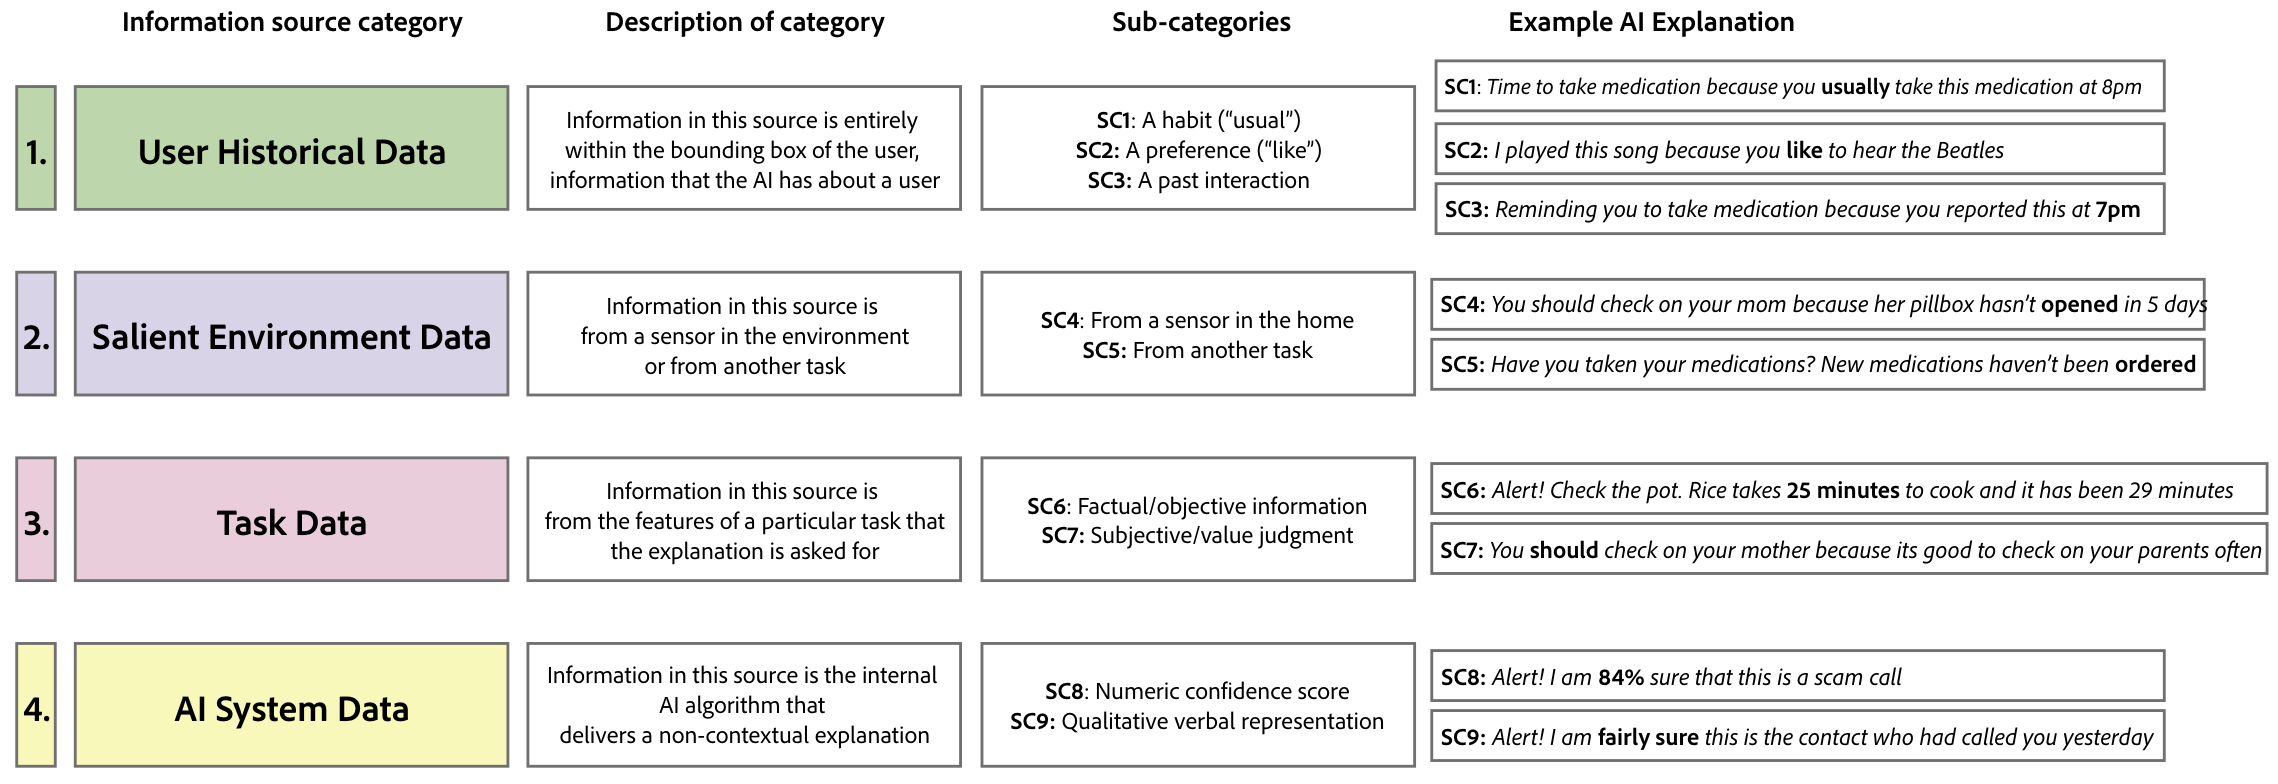 Categorizing Sources of Information for Explanations in Conversational AI Systems for Older Adults Aging in Place